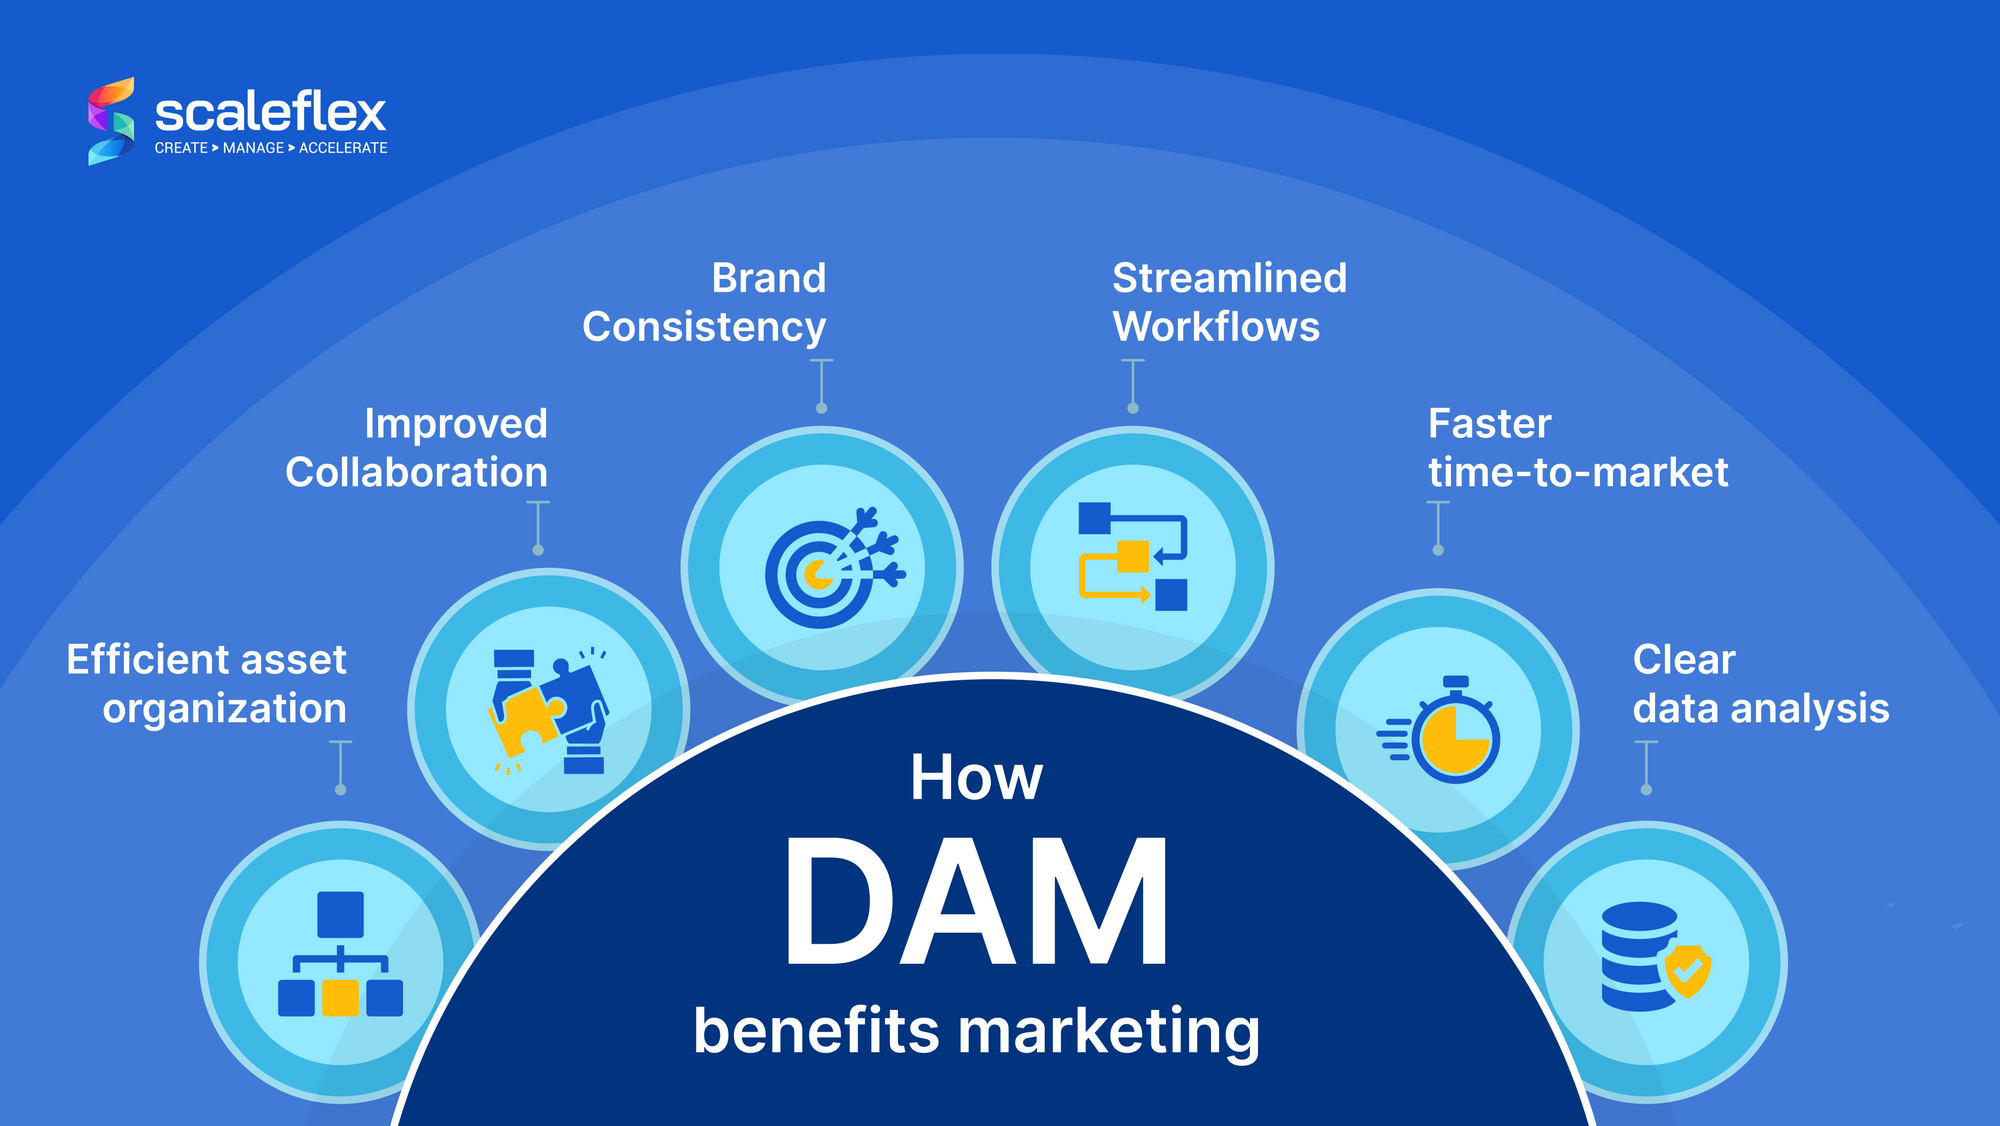 The different benefits of DAM for marketing are explored. market and clearer data analysis.